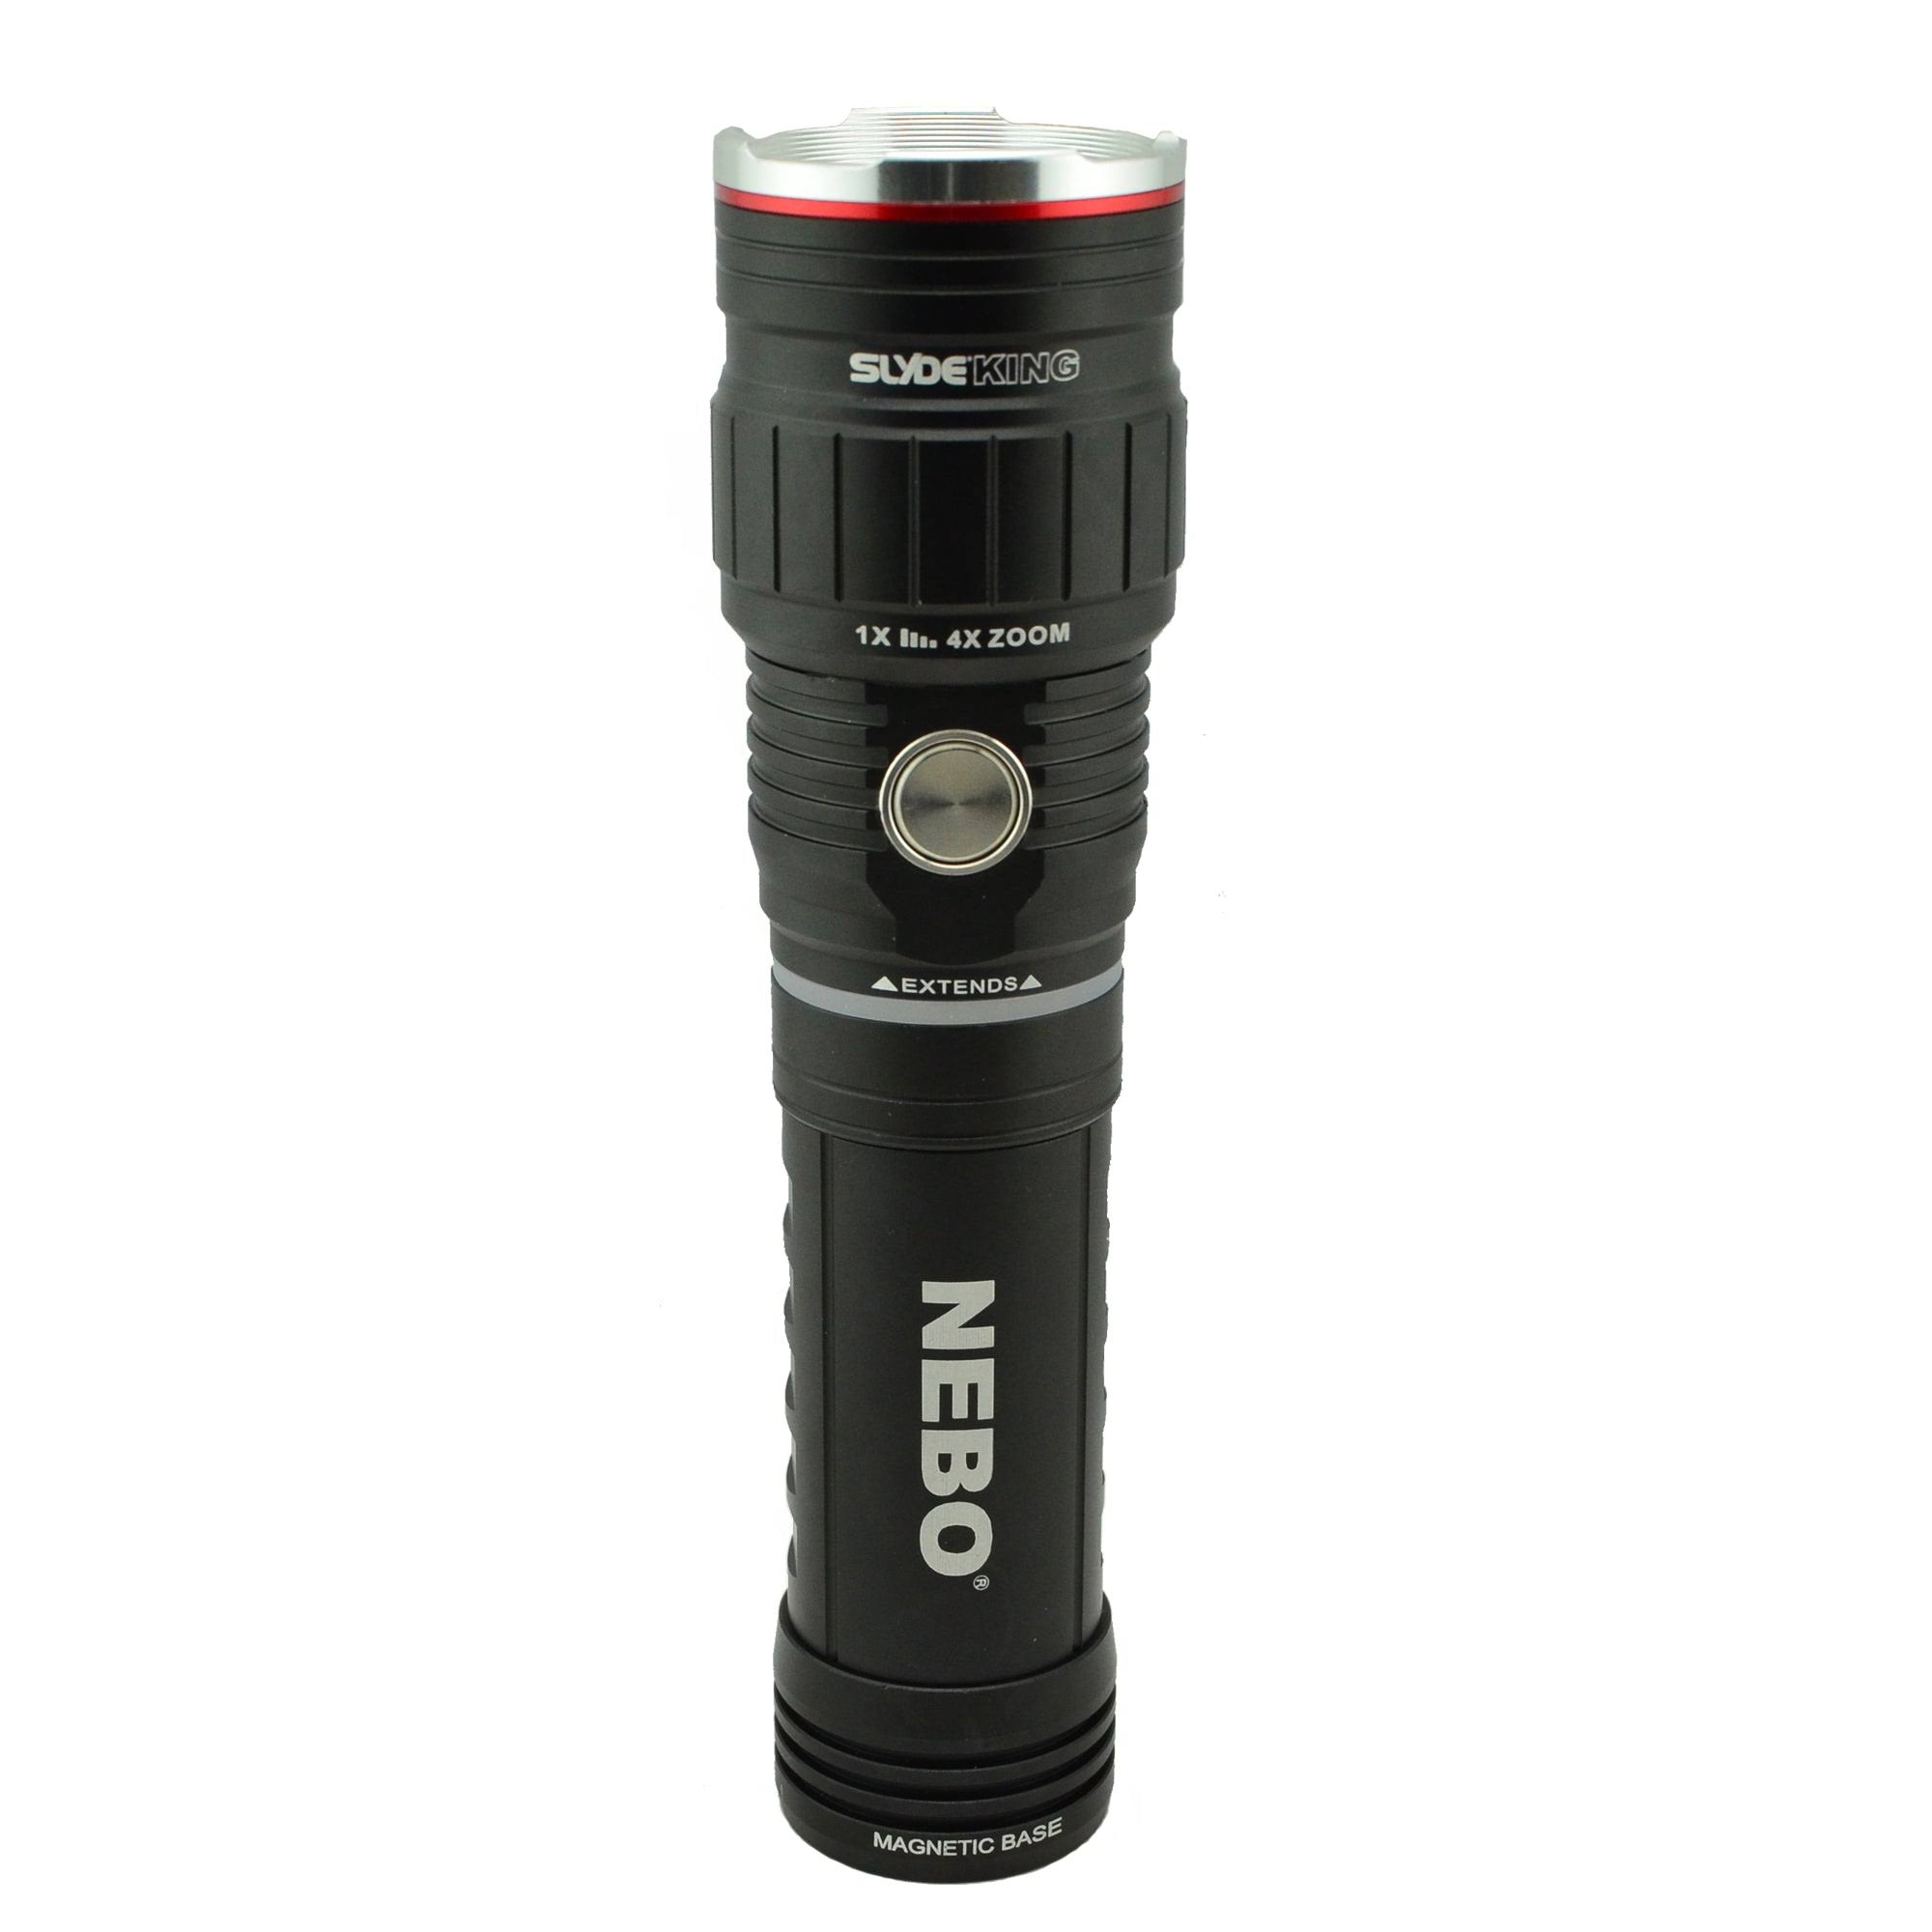 500 Lumen Cob LED Work-Light and Flashlight, Red Light Mode and Red Flashing Light Mode, 4x Adjustable Zoom, Magnetic Base, No Need to Buy Batteries